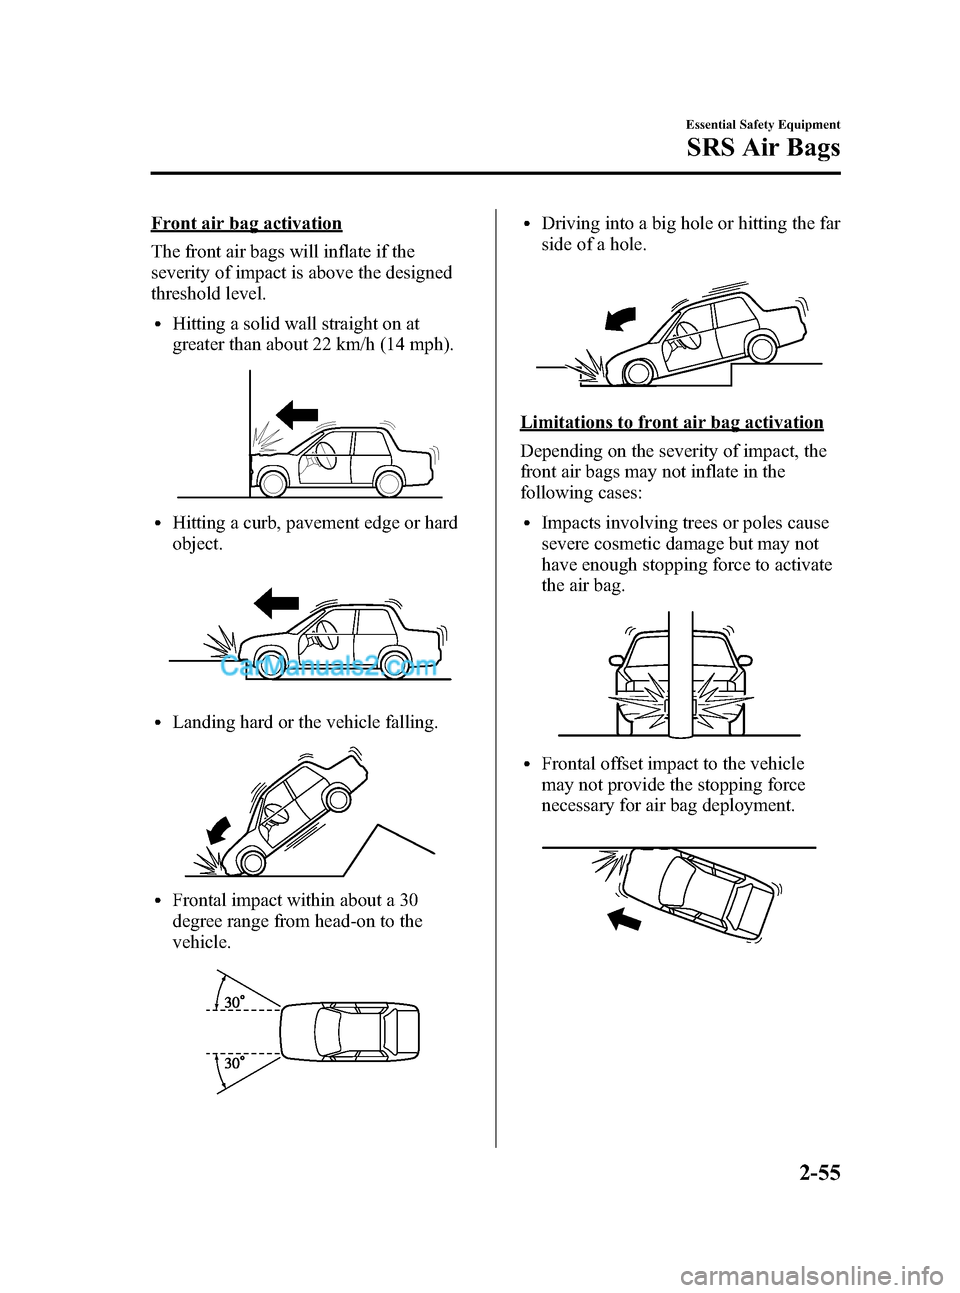 MAZDA MODEL MAZDASPEED 3 2007   (in English) Repair Manual Black plate (69,1)
Front air bag activation
The front air bags will inflate if the
severity of impact is above the designed
threshold level.
lHitting a solid wall straight on at
greater than about 22 